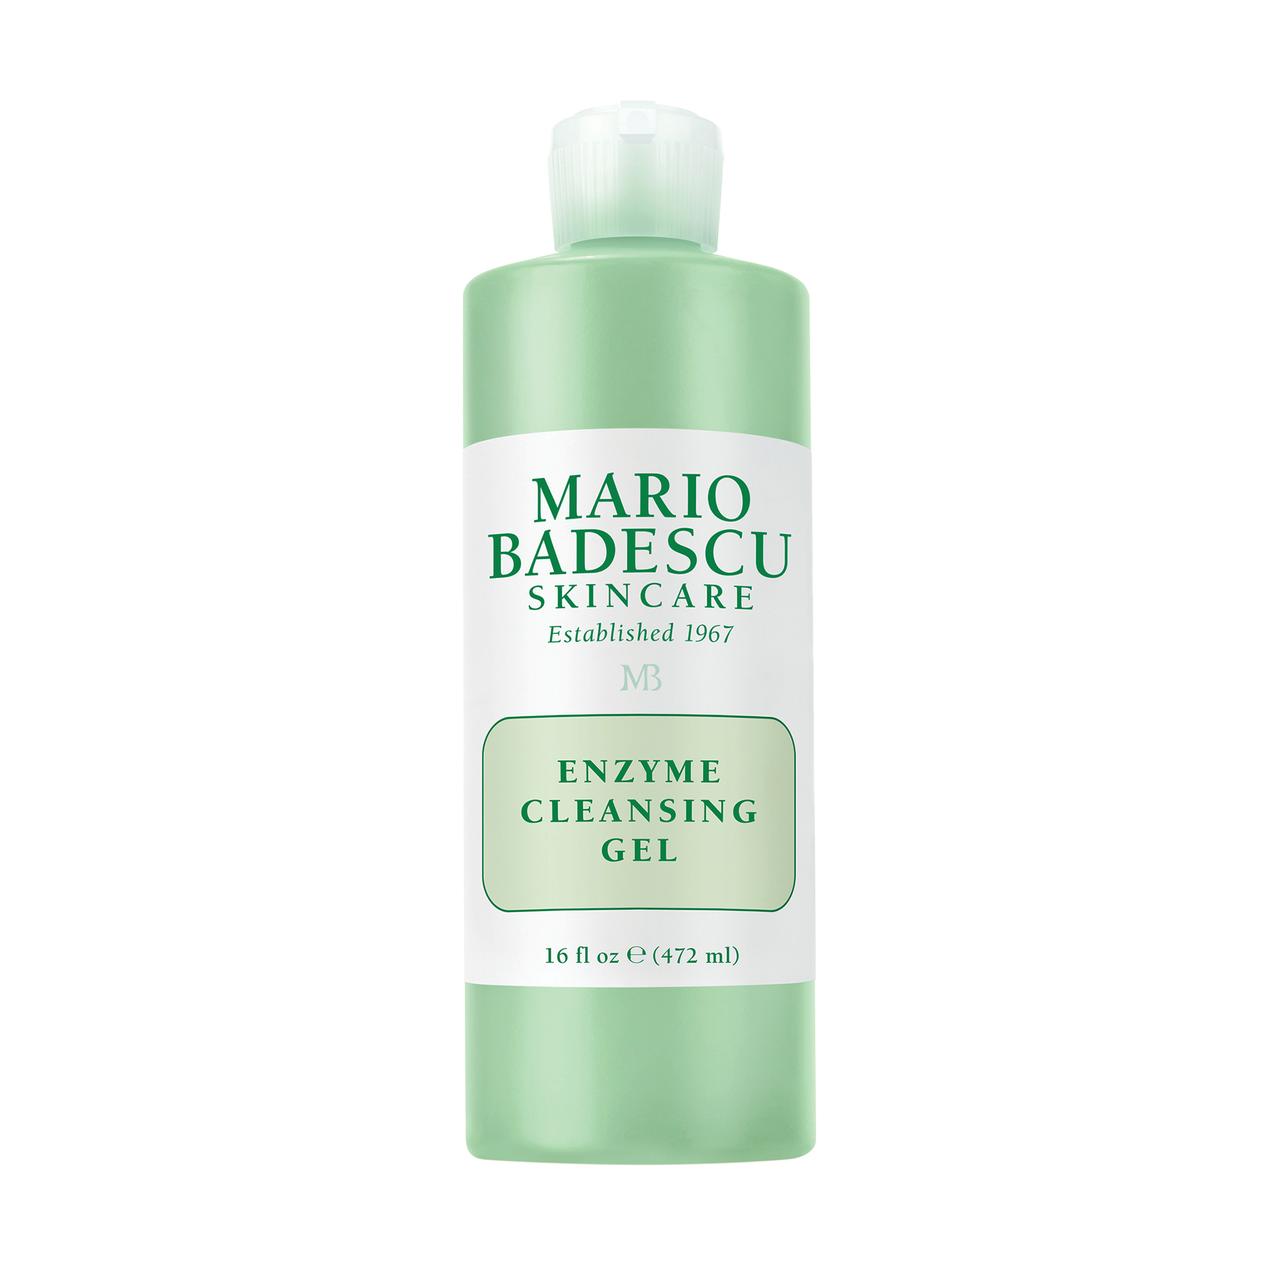 Mario Badescu Enzyme Cleansing Skin Care Face Wash Gel, 16 fl oz - image 1 of 5